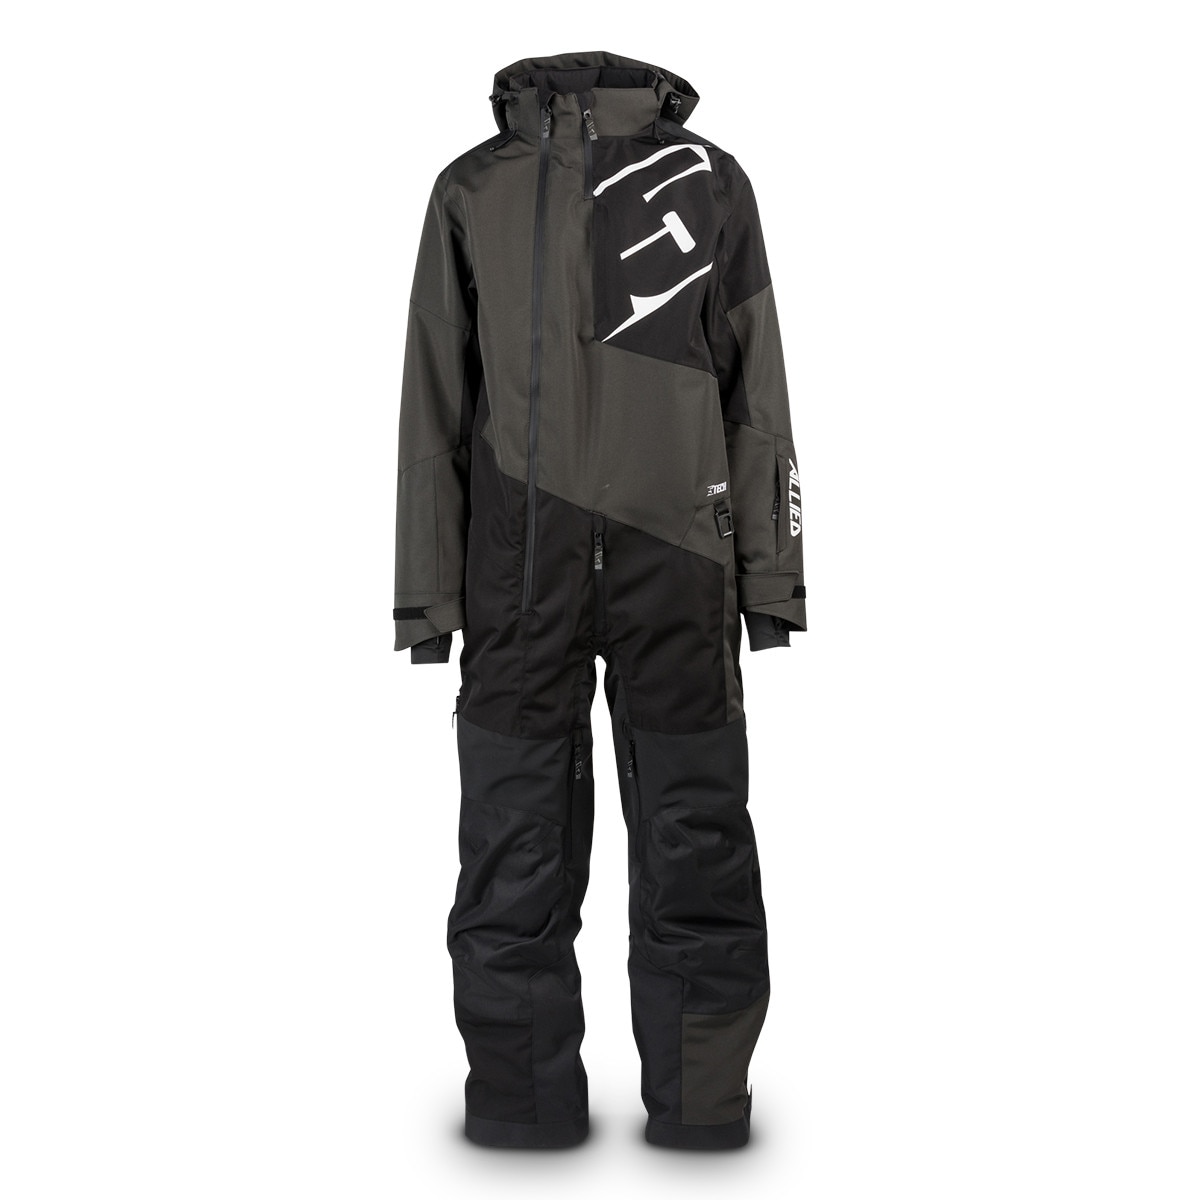 Monosuit 509 Allied Insulated, Black Ops